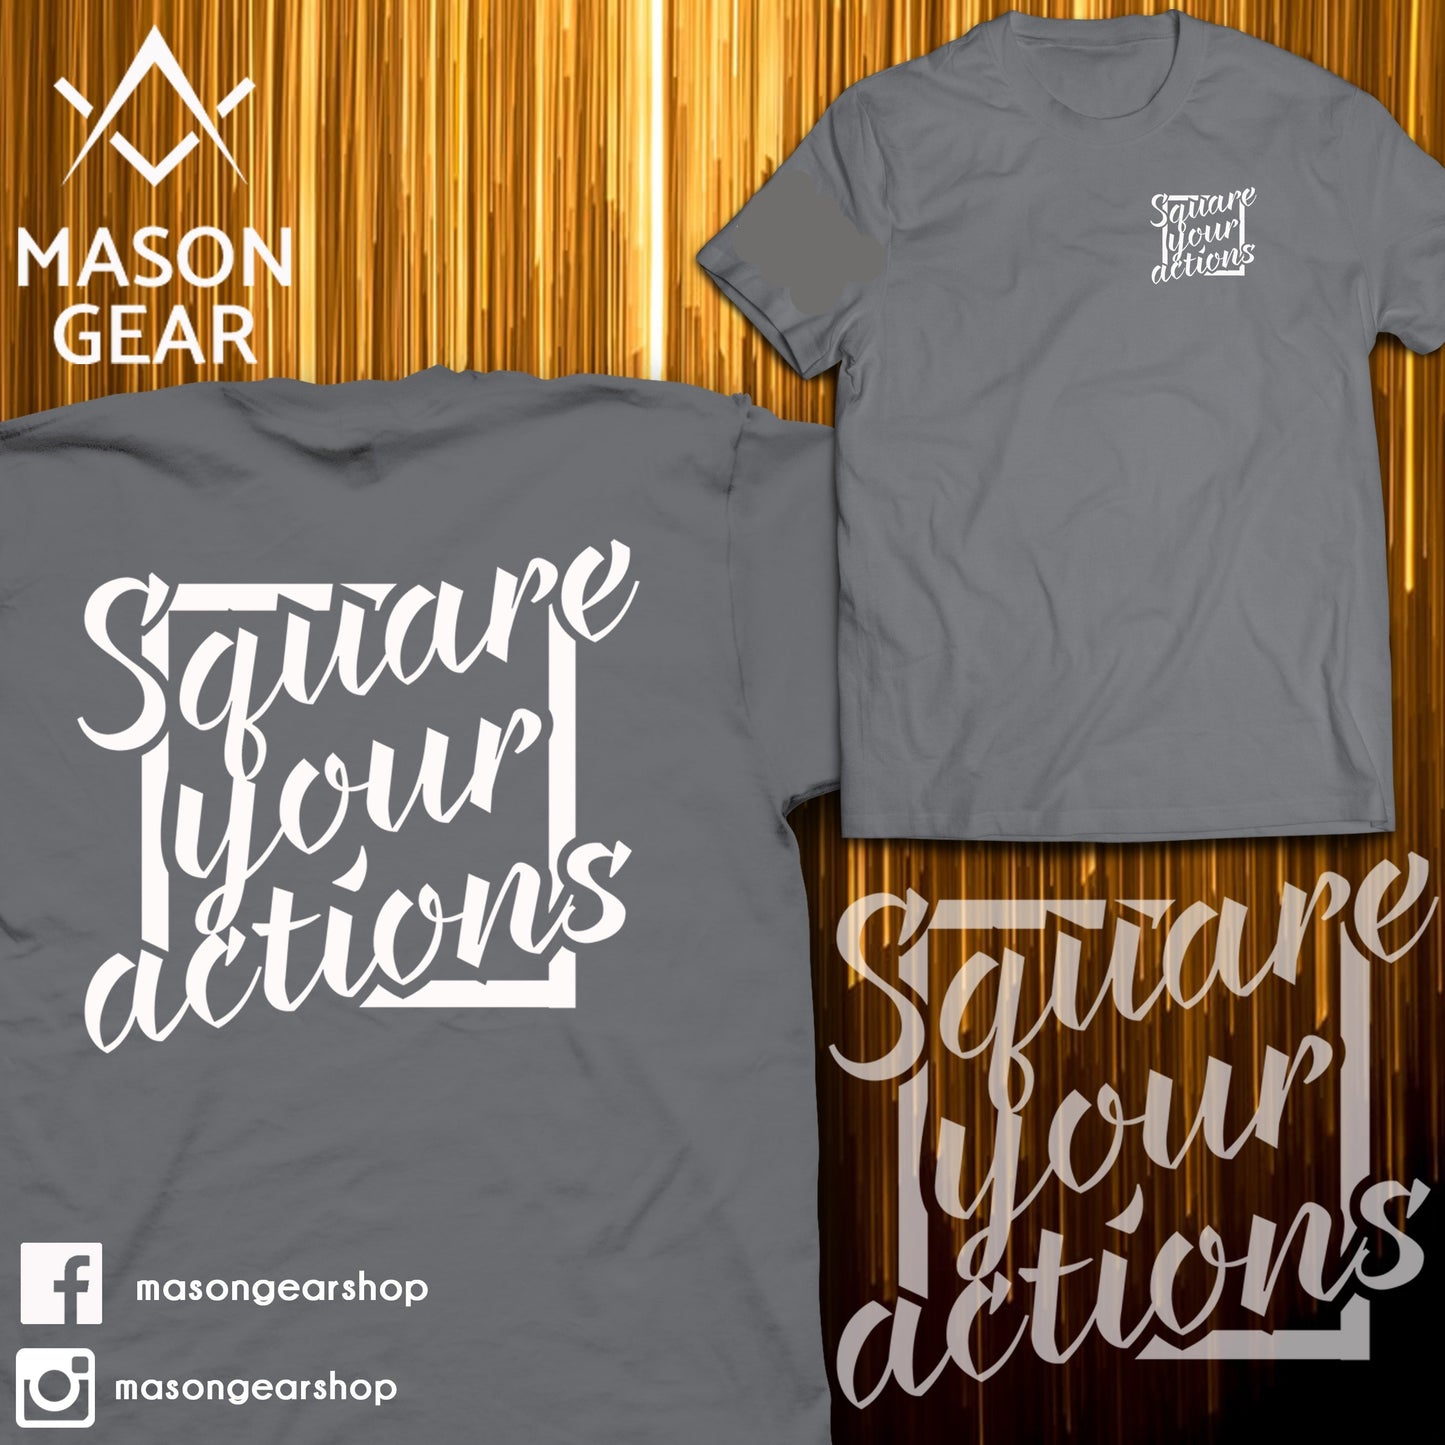 Square your Actions- Tshirt - Mason Gear Shop